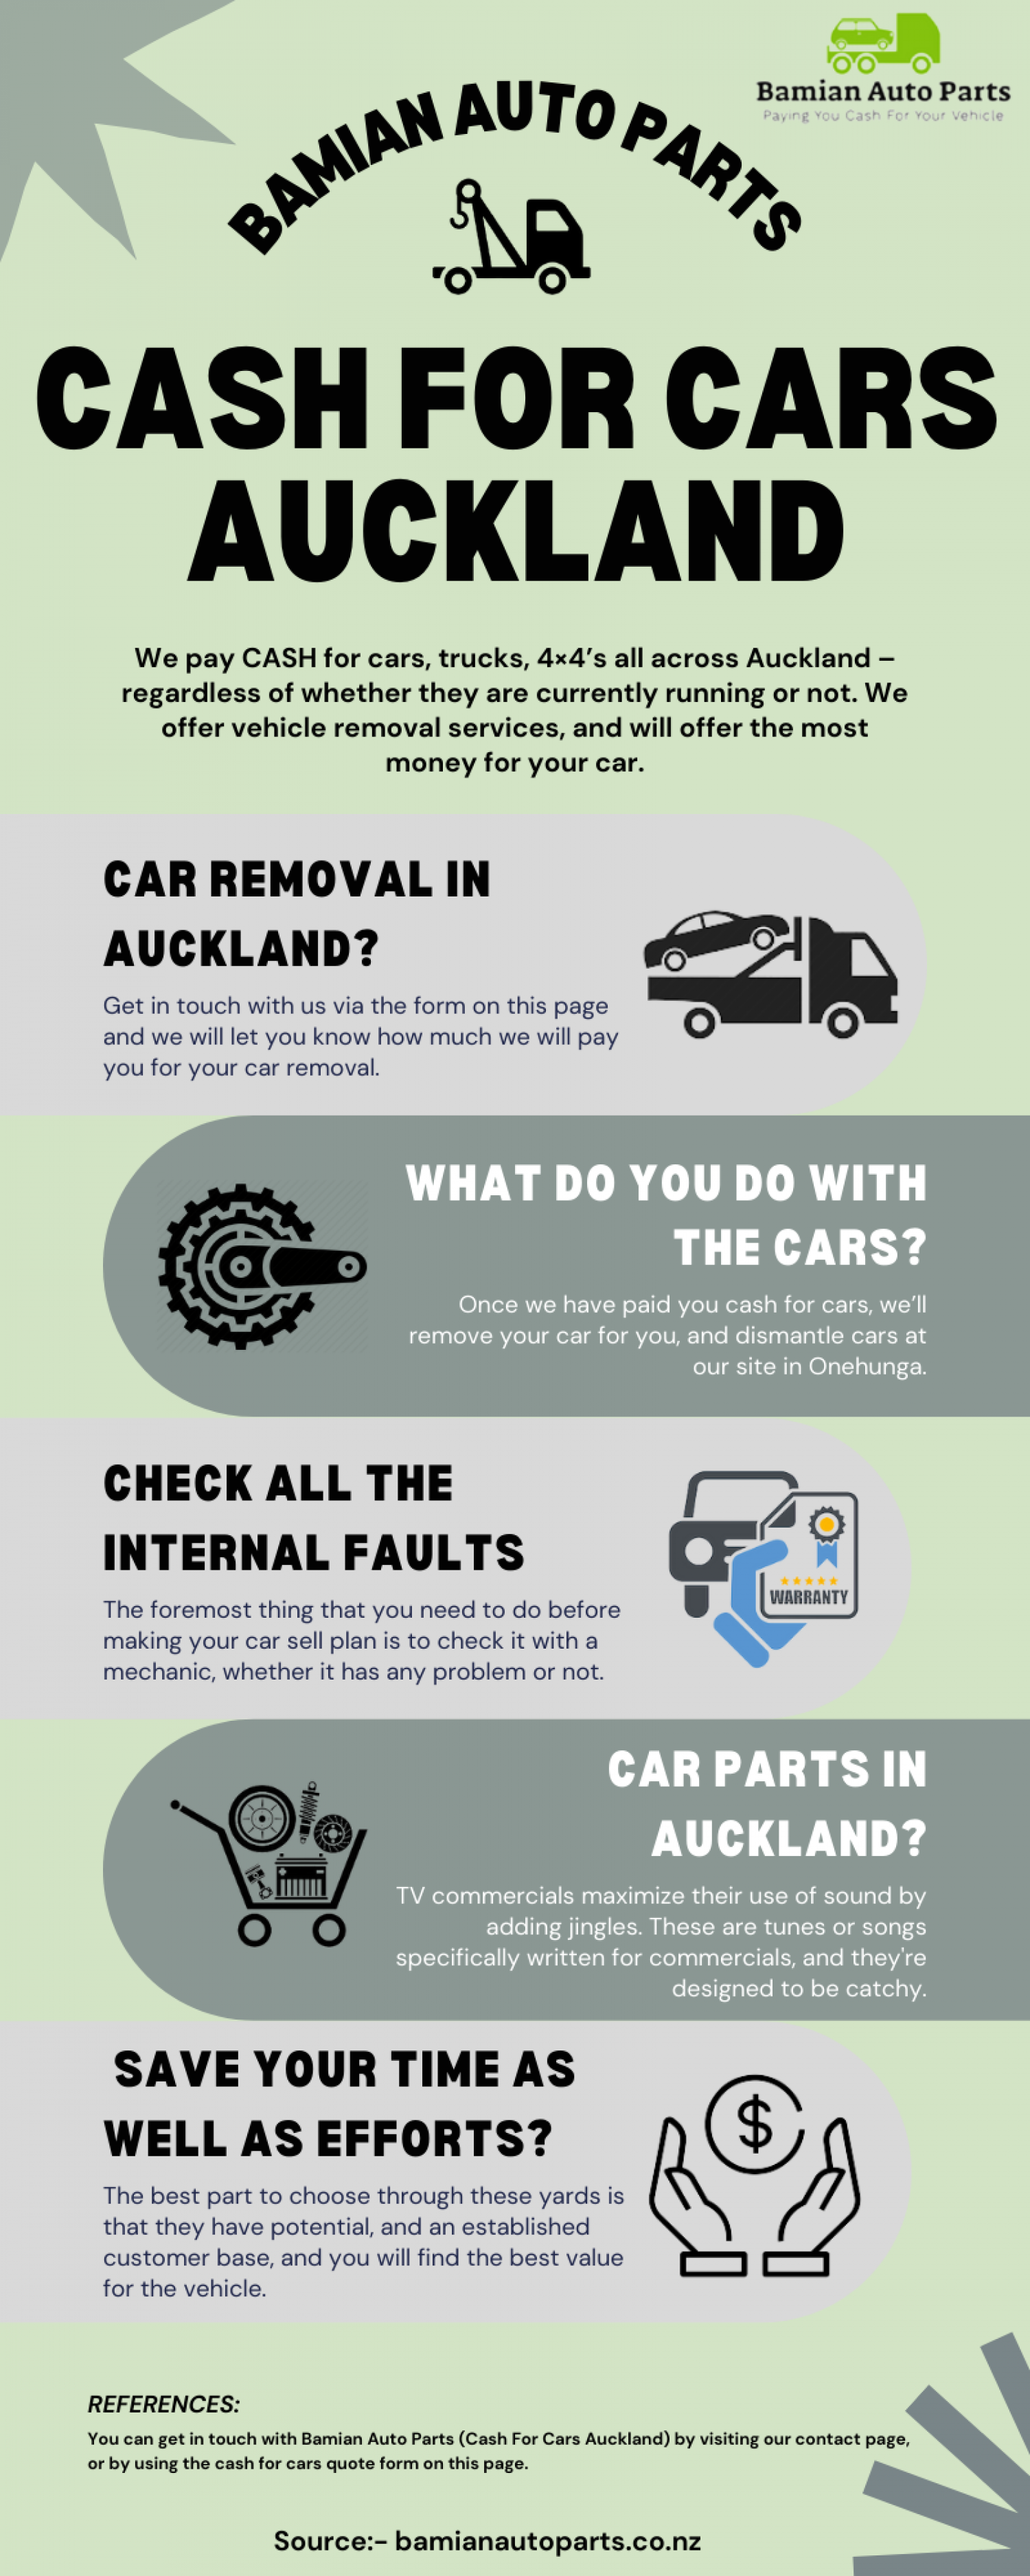 Cash for Cars Auckland | Car Removal Services in Auckland Infographic